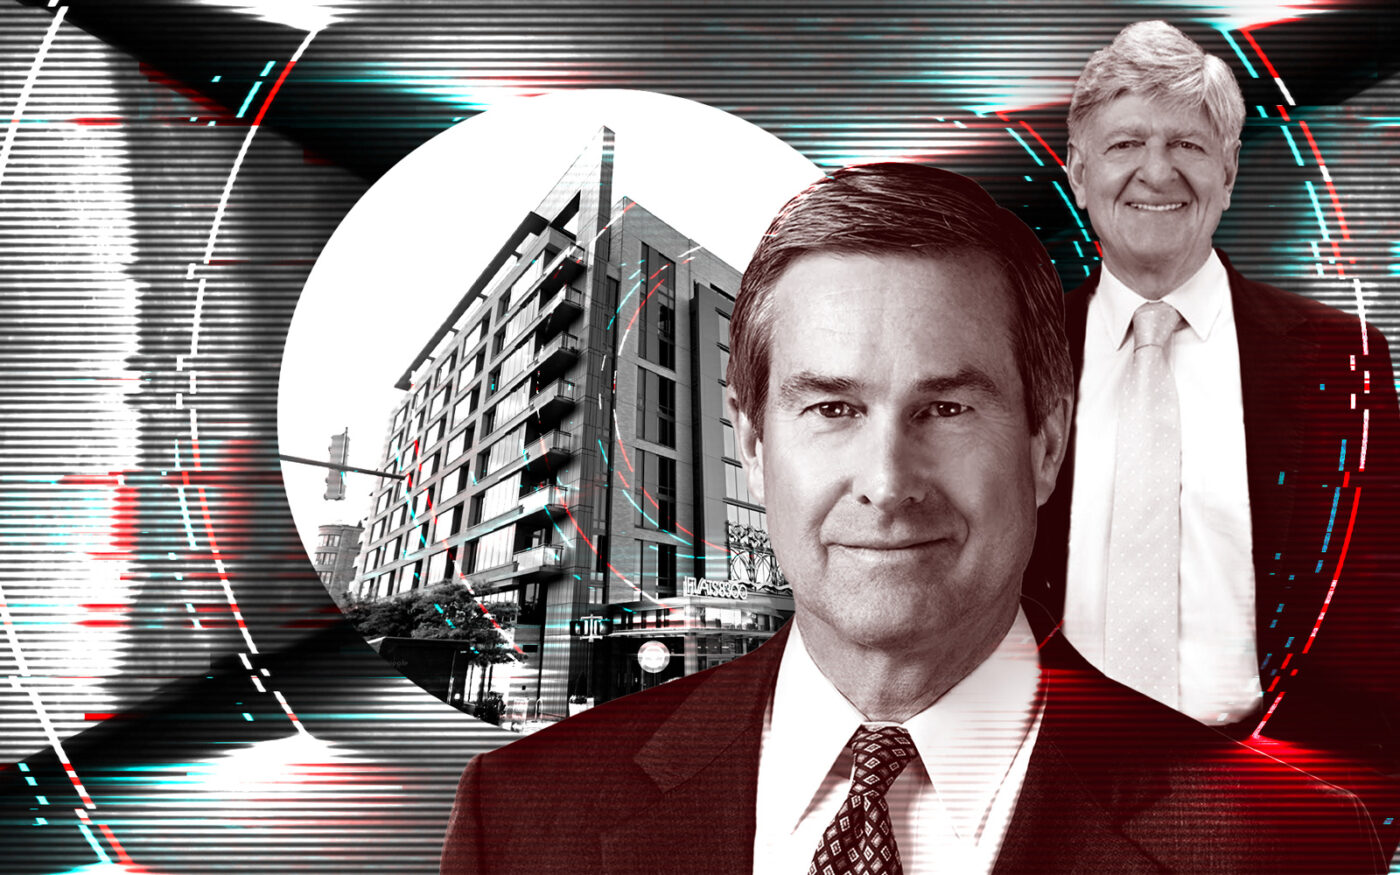 Invesco’s Multifamily Sale in Bethesda Shows Market Shift